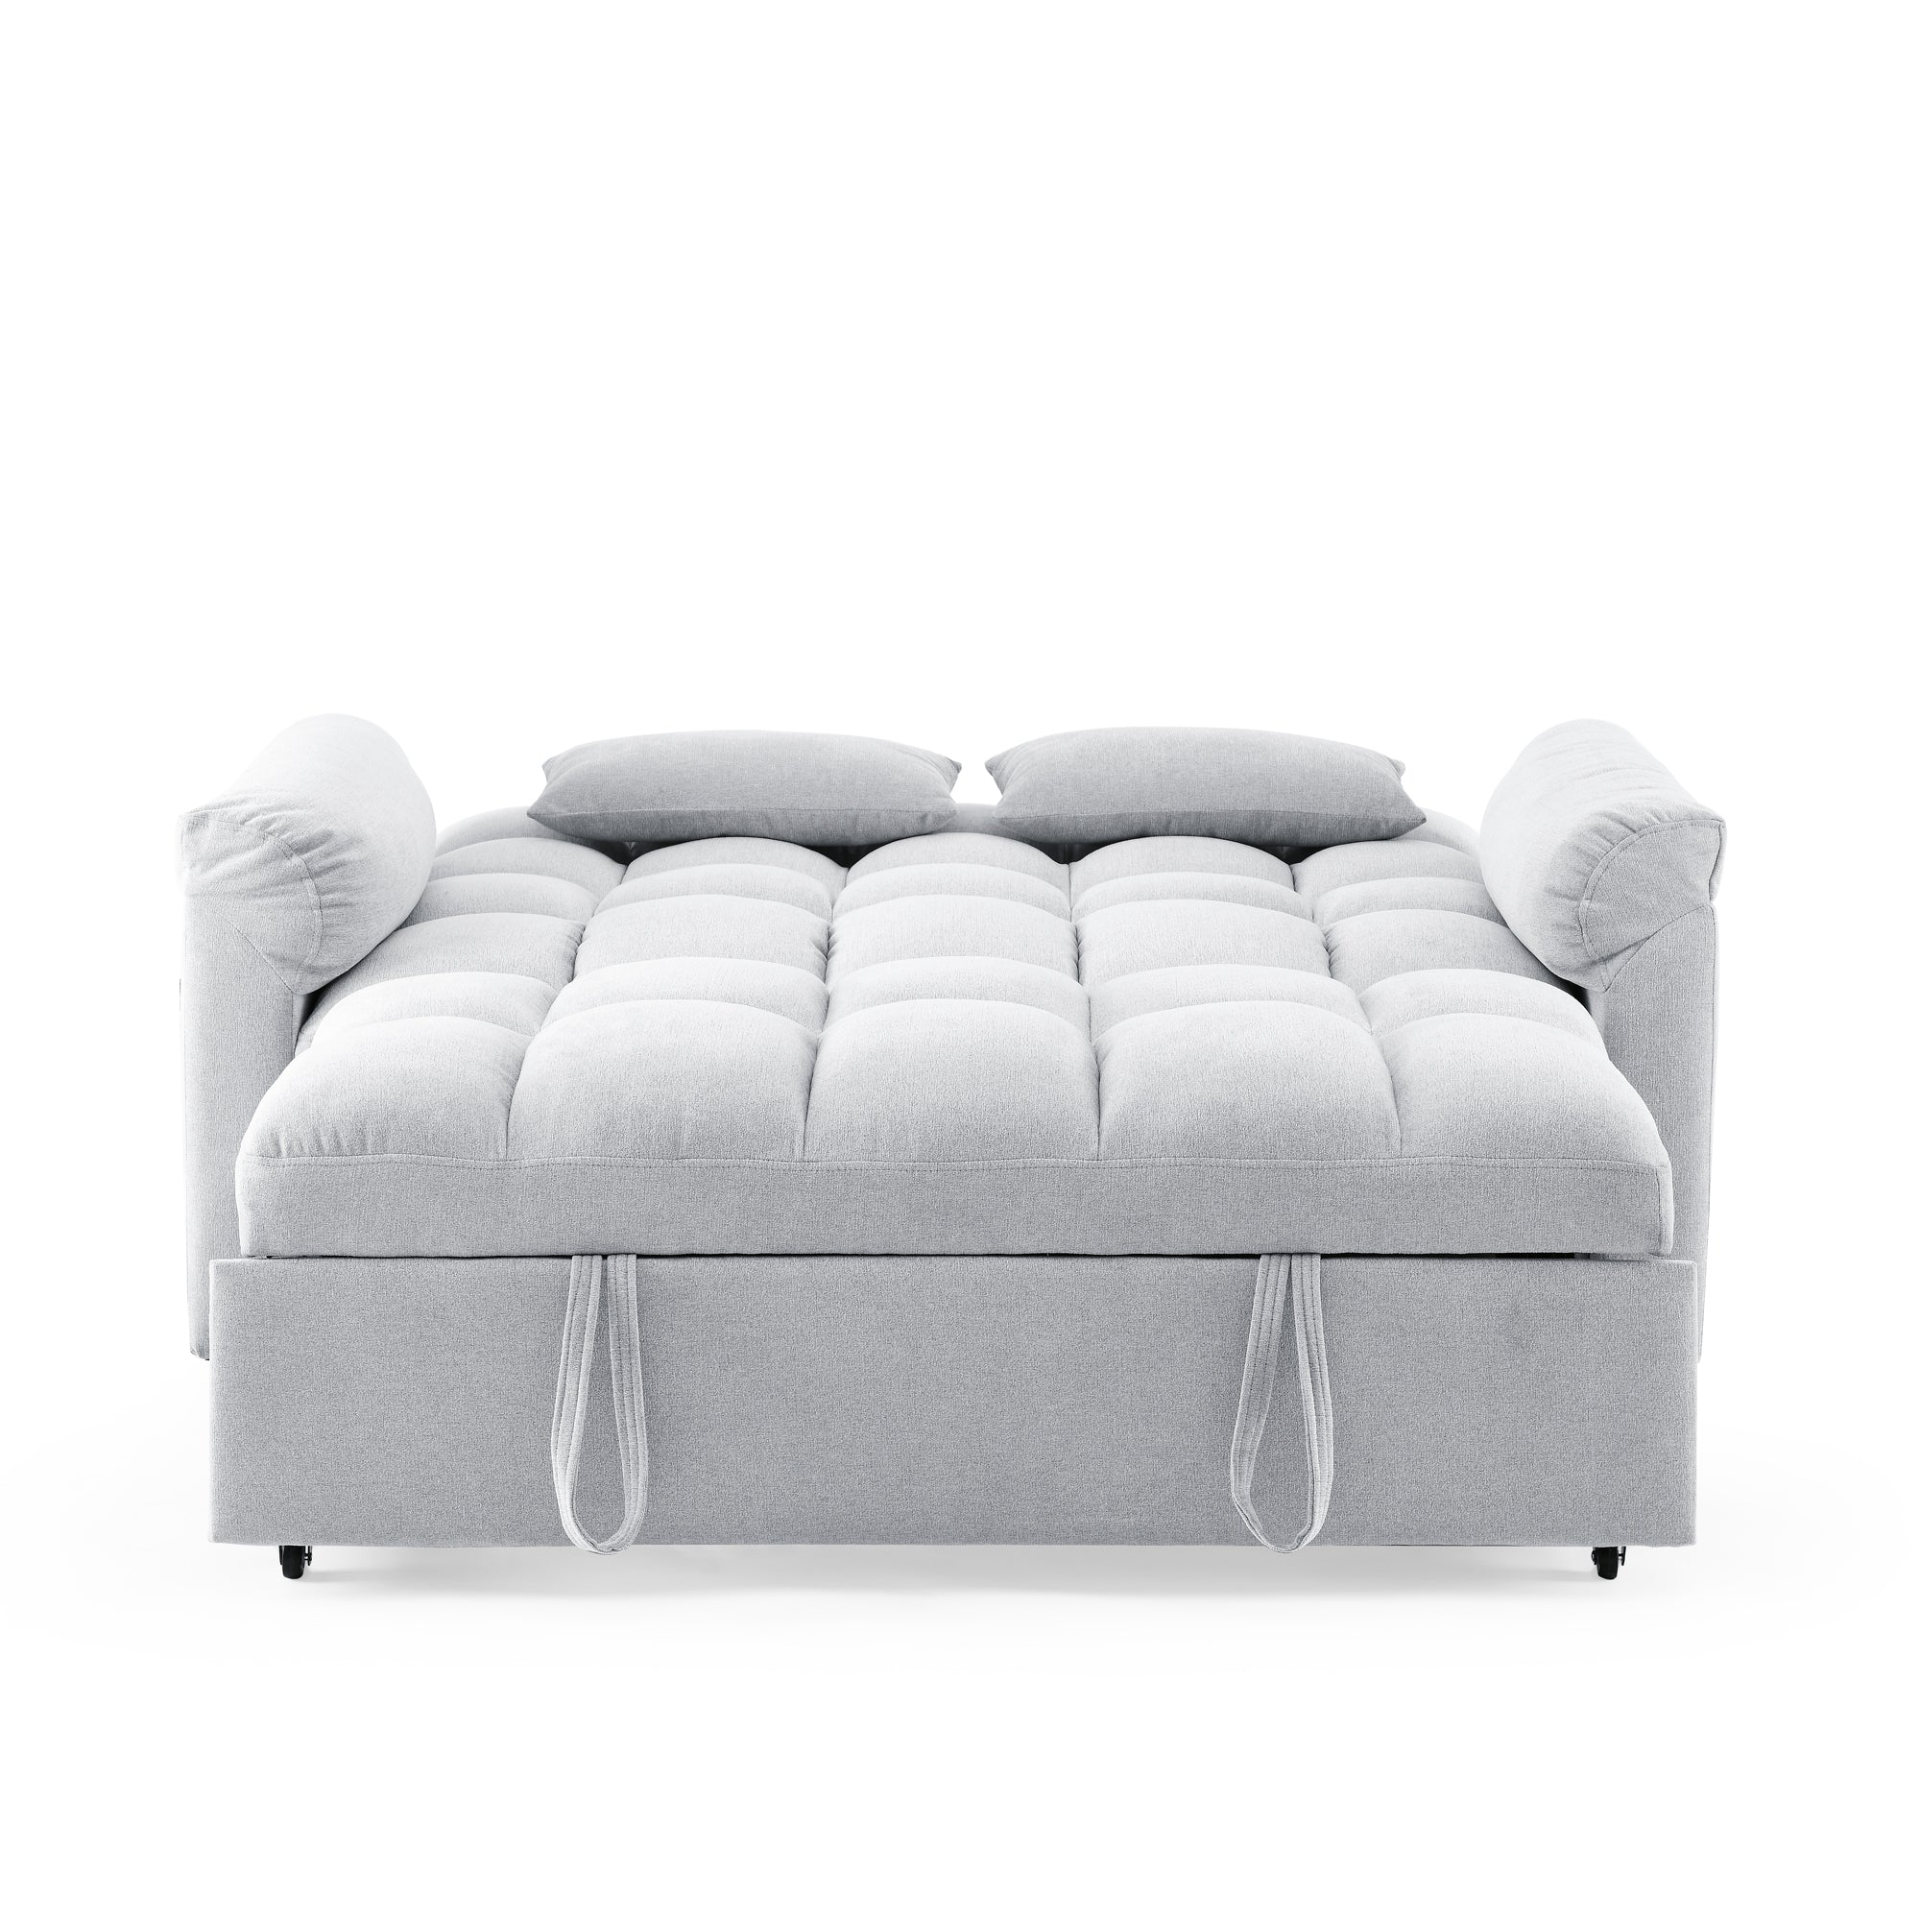 Light Grey Modern Luxury Loveseats Sofa Bed with Pull-out Bed